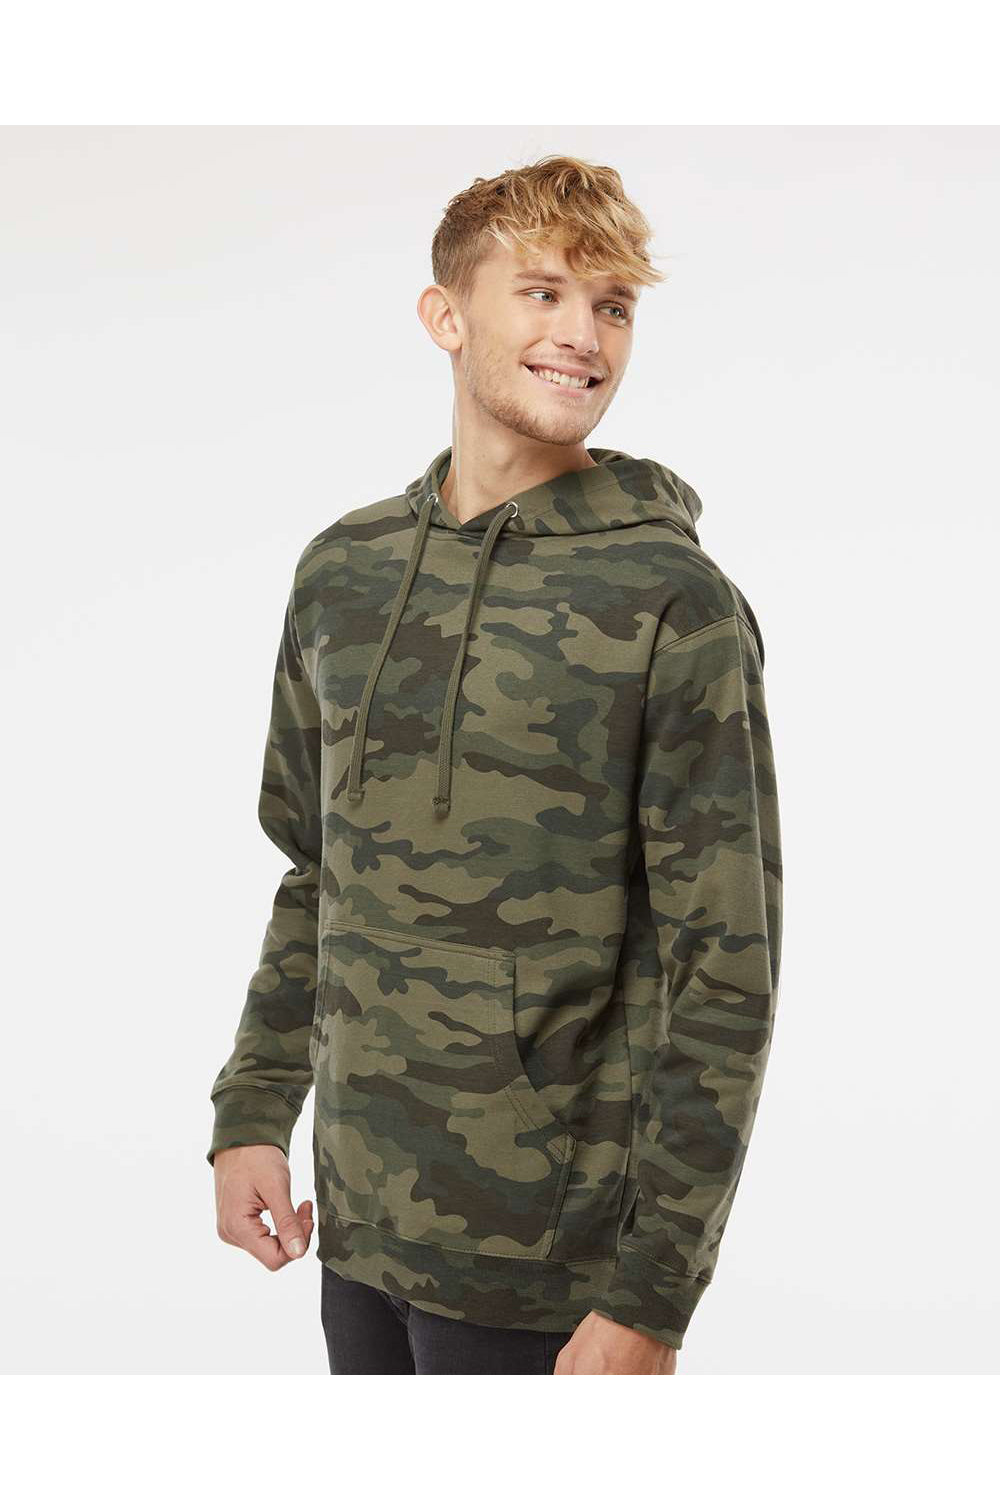 Independent Trading Co. SS4500 Mens Hooded Sweatshirt Hoodie Forest Green Camo Model Side